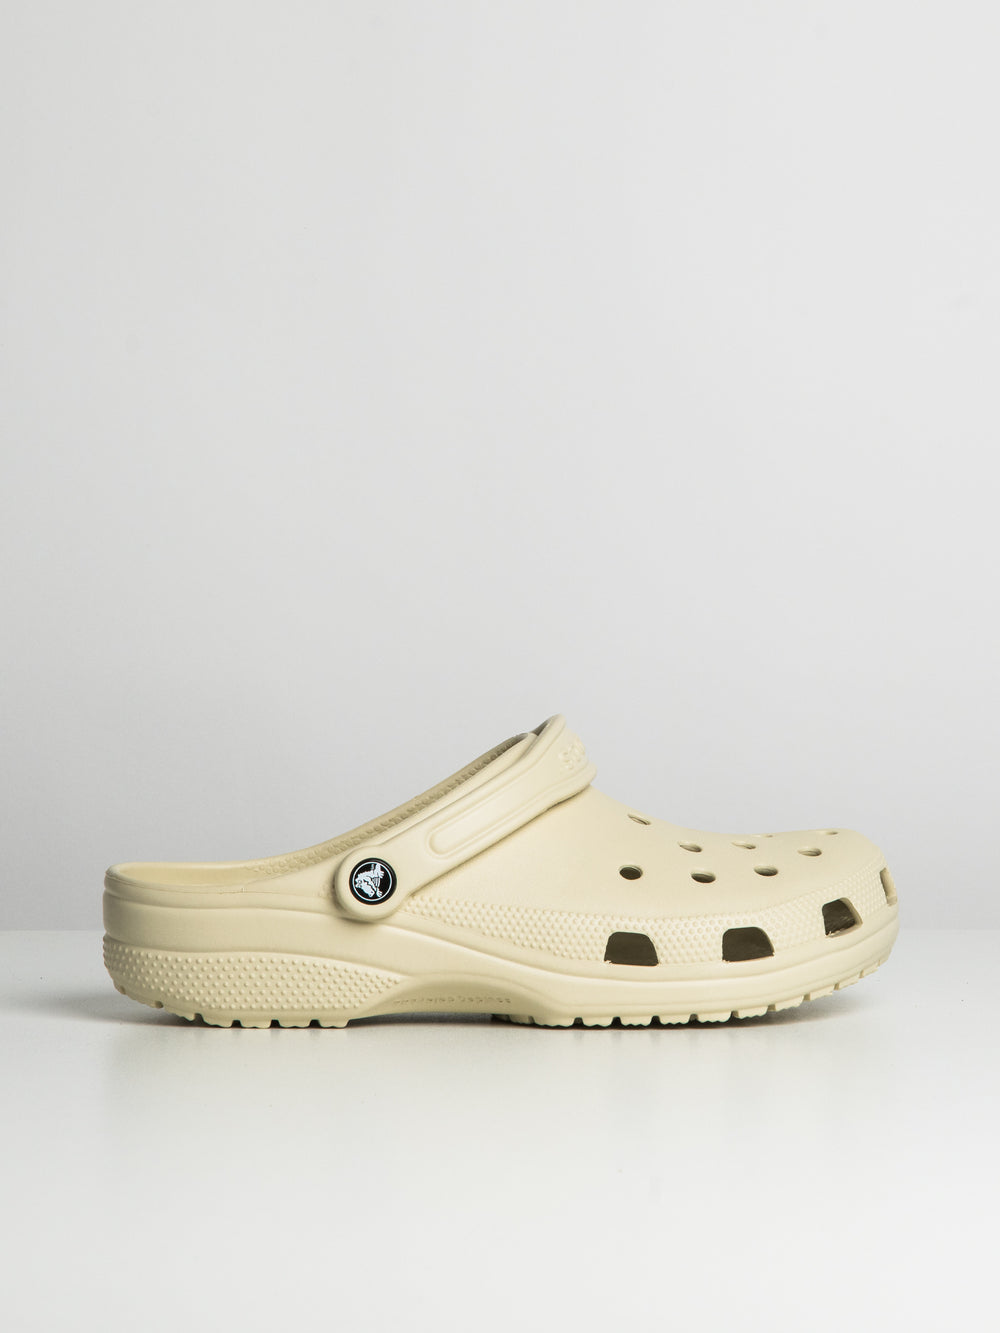 Crocs Going Out Clogs for Men